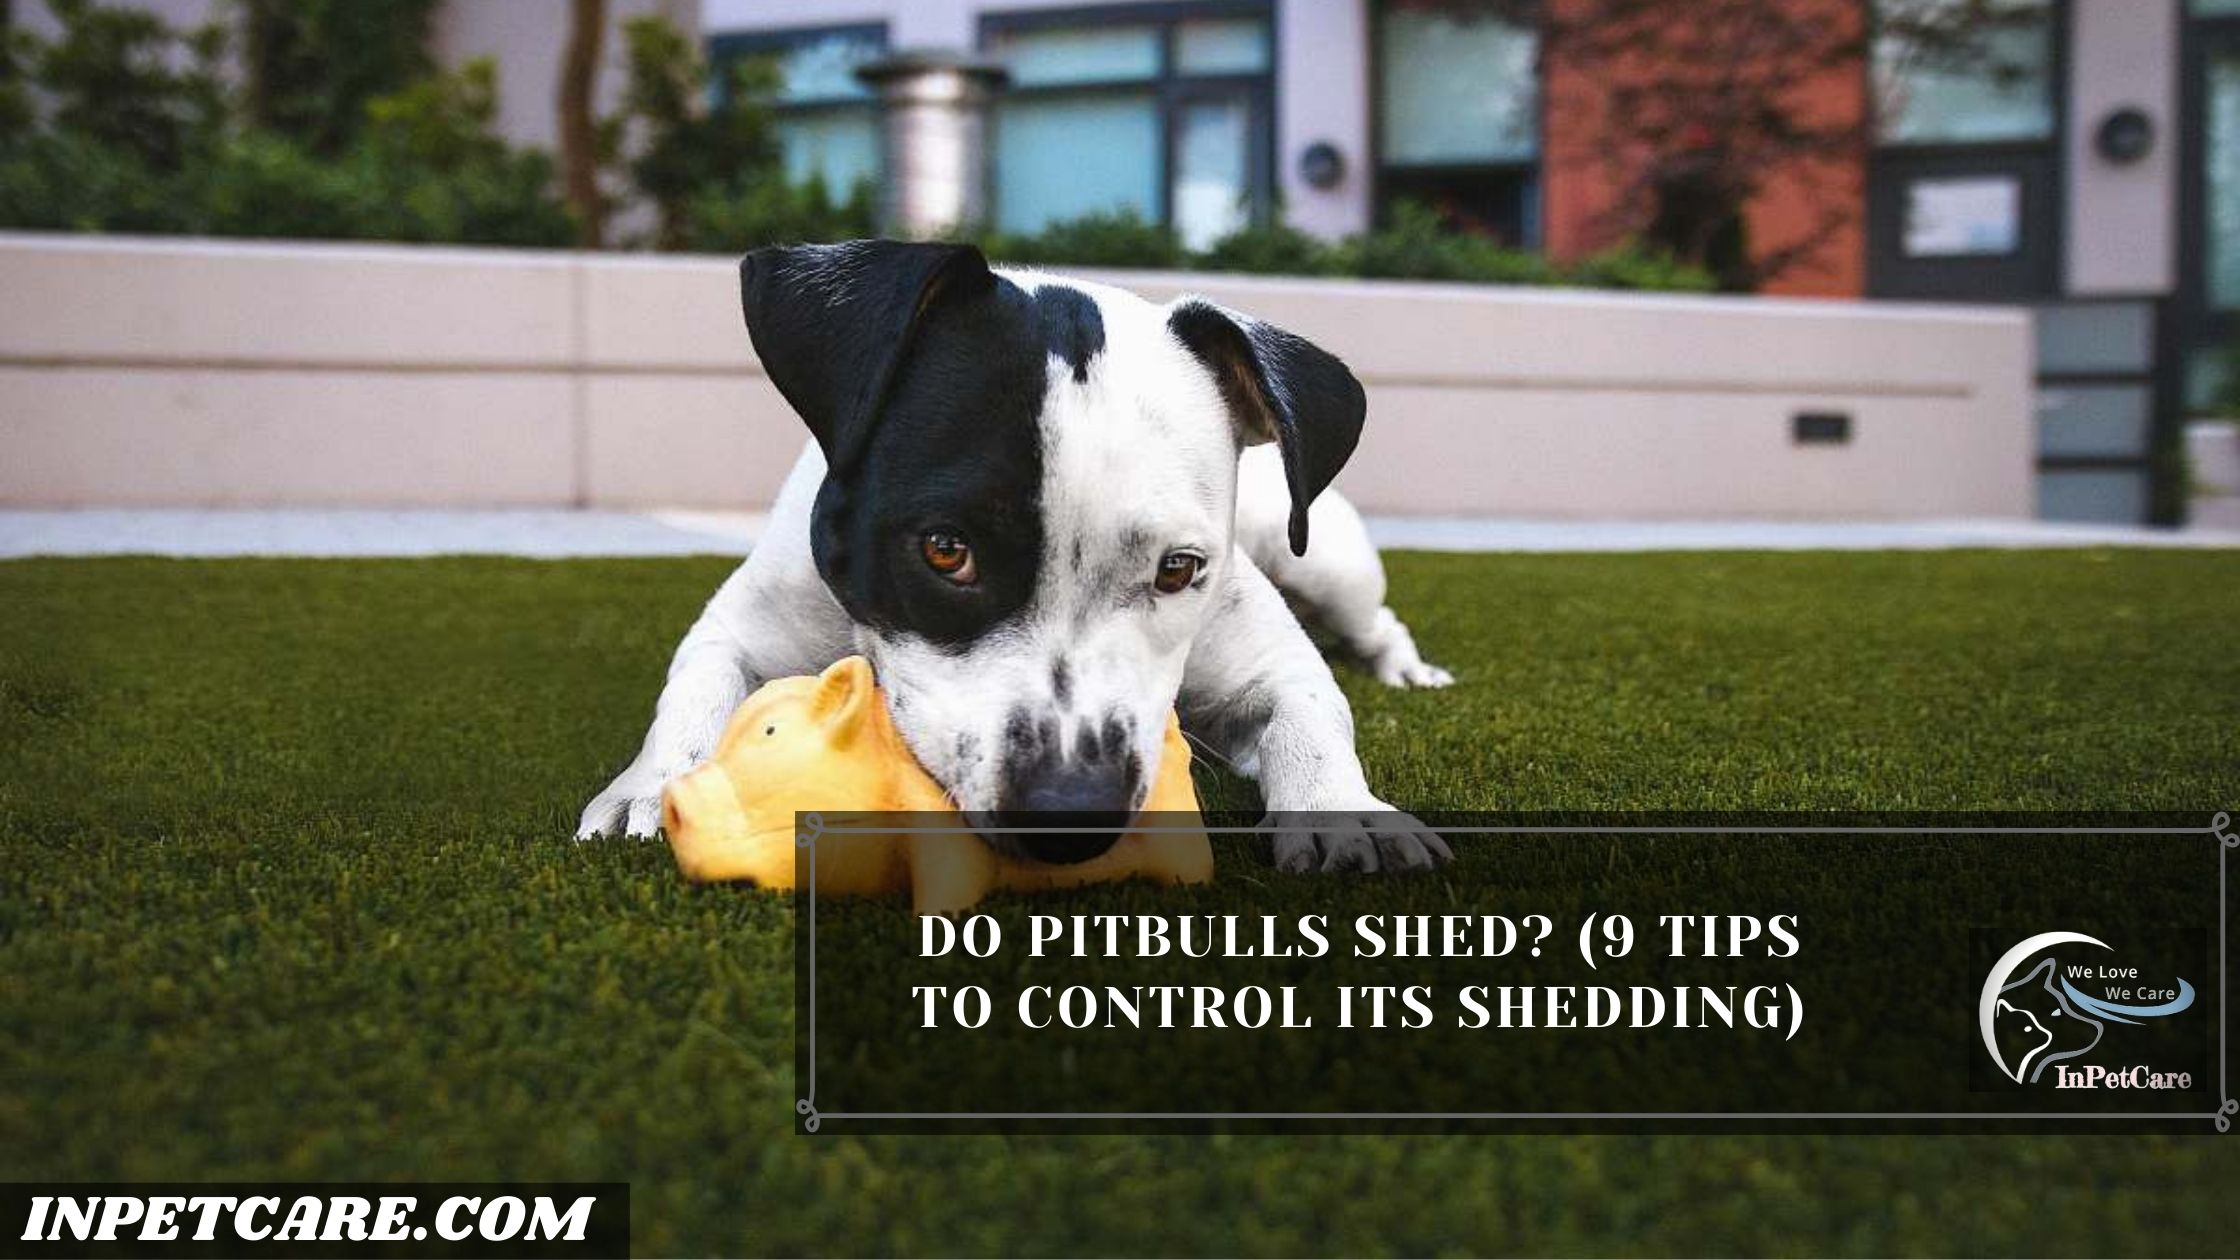 Do Pitbulls Shed? (9 Tips To Control Its Shedding)